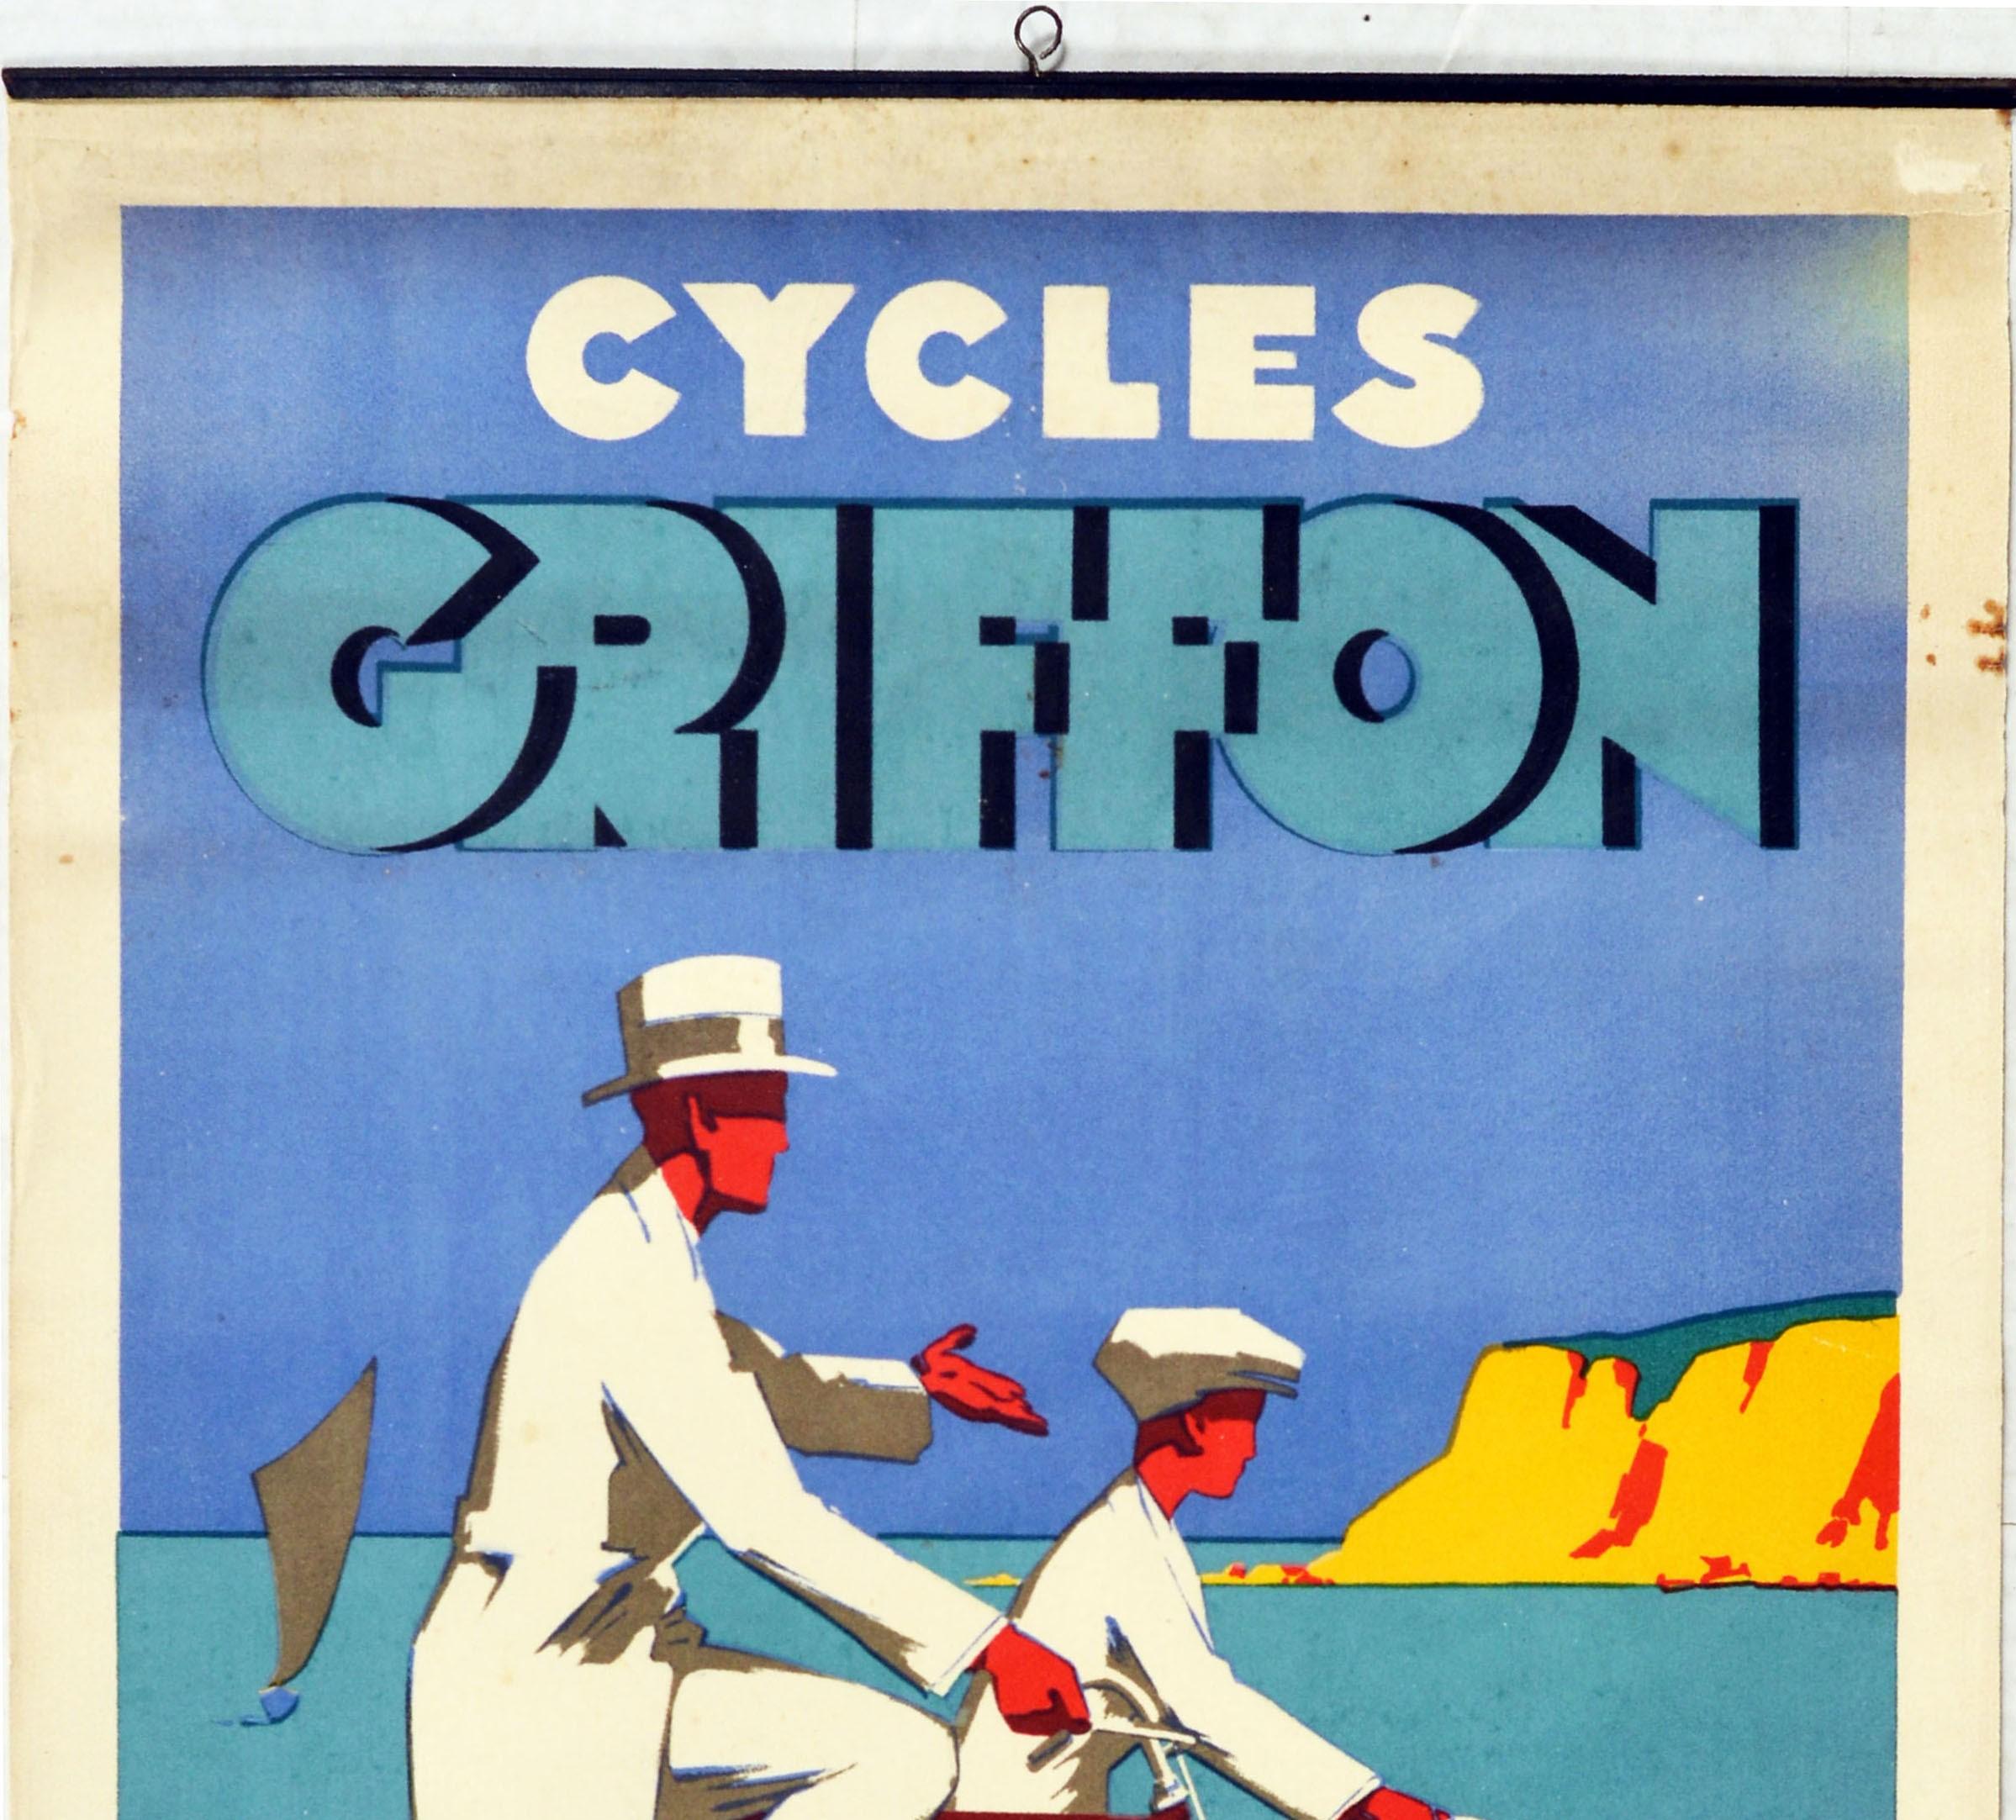 Original Vintage Art Deco Advertising Poster Cycles Griffon Cycling France Coast - Print by Georges Favre